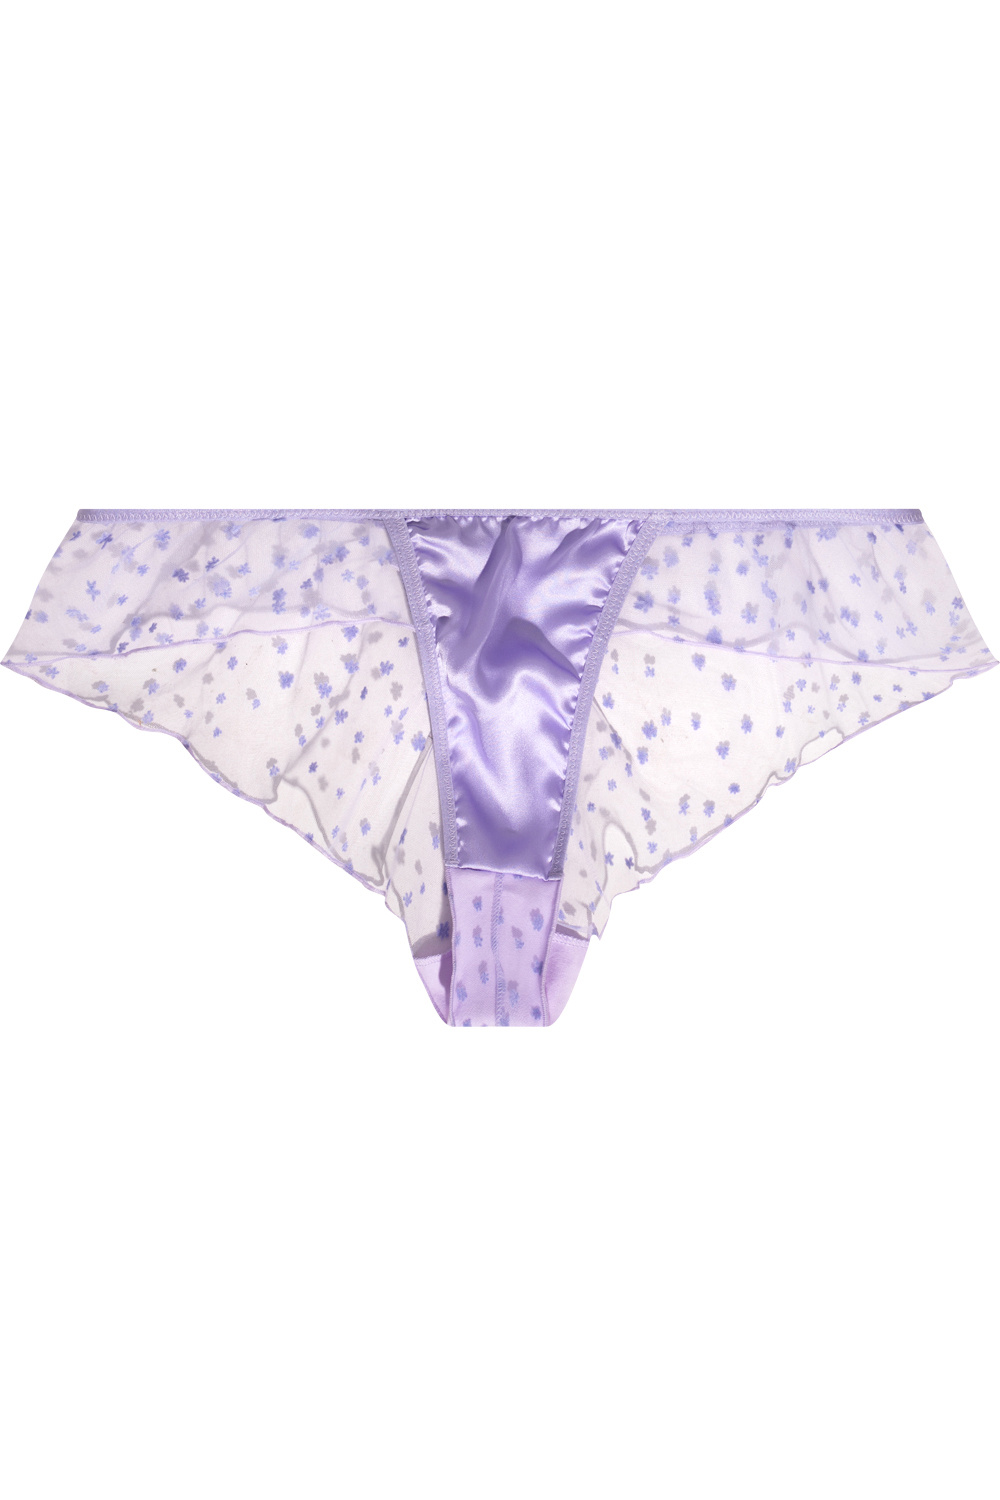 Lupin' briefs with cut-out Le Petit Trou - GenesinlifeShops NZ